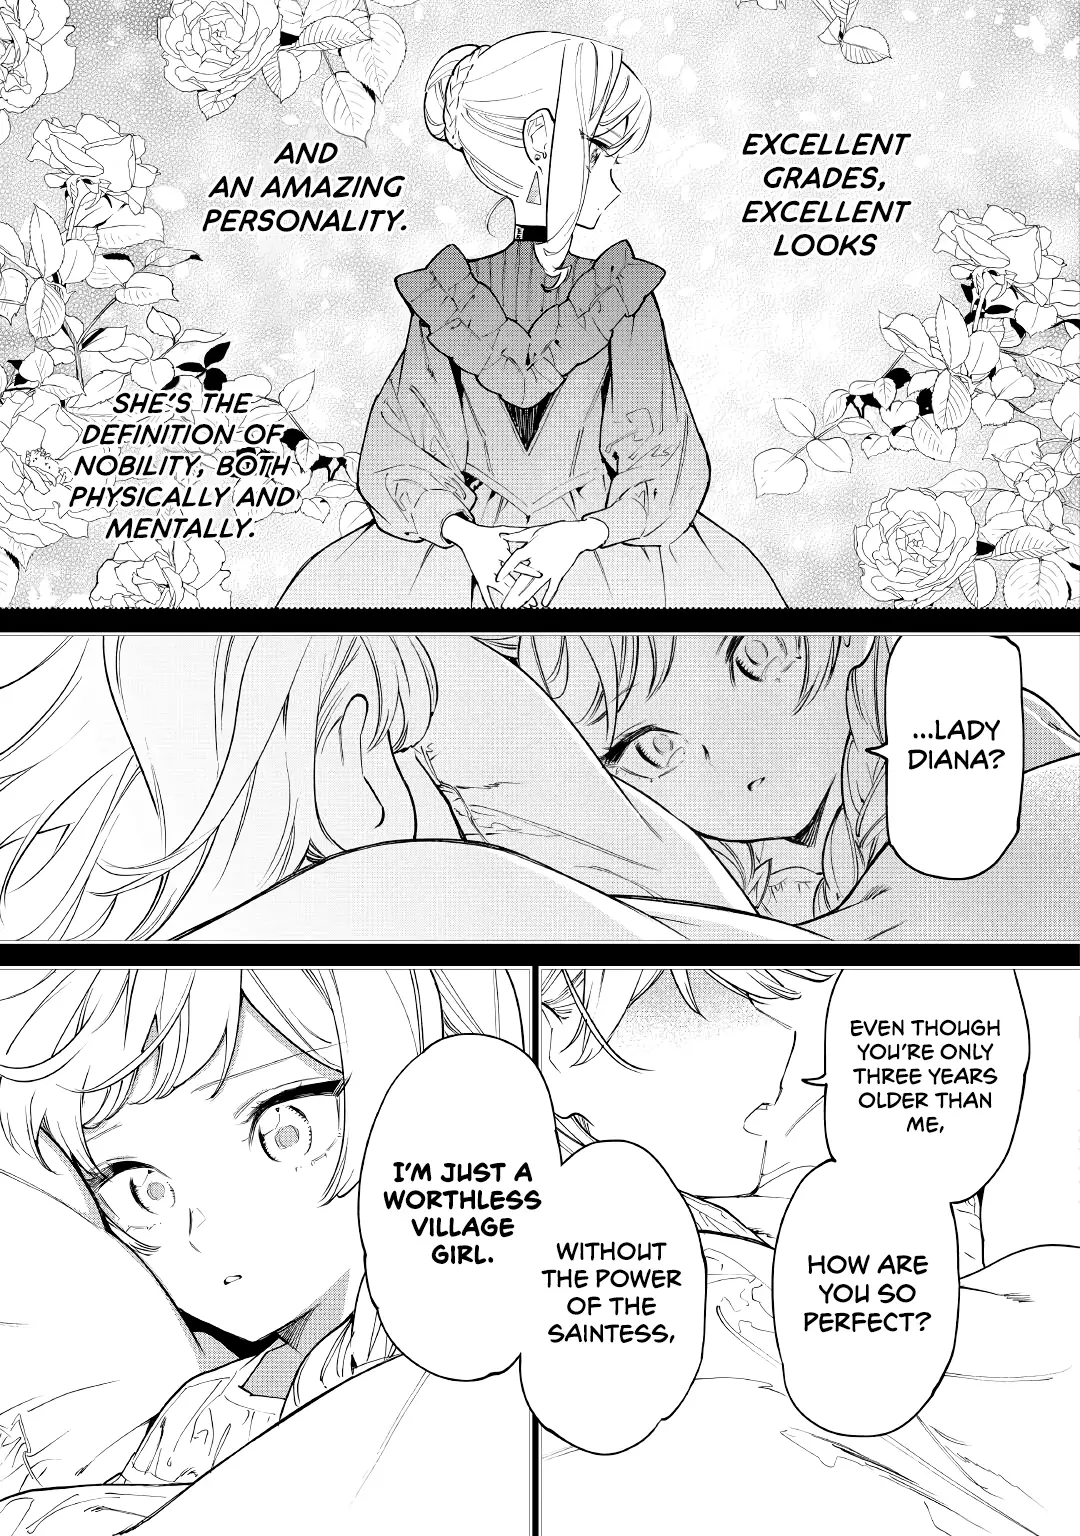 May I Please Ask You Just One Last Thing? - 25 page 23